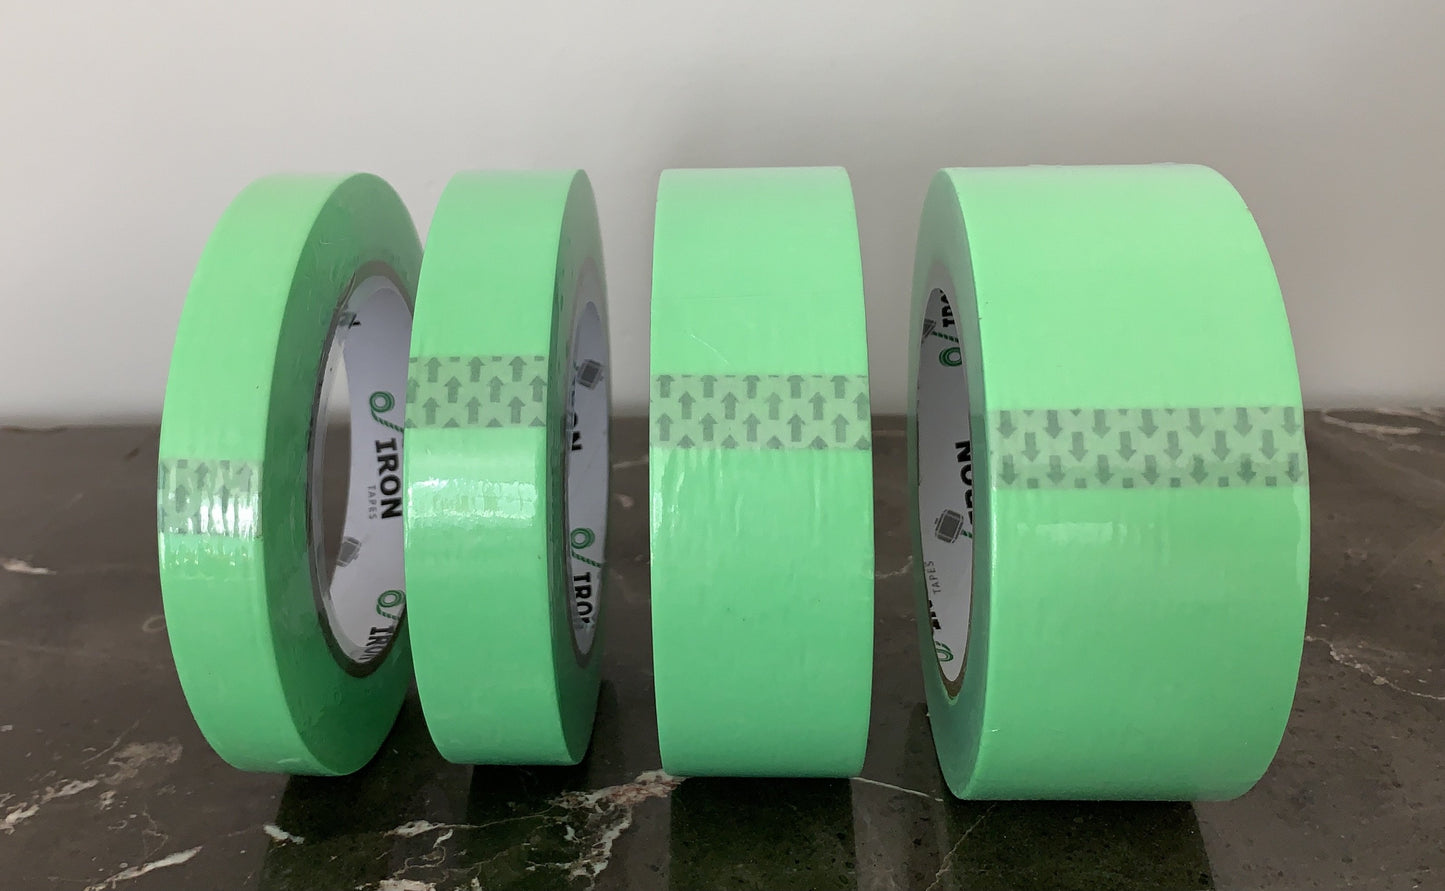 14 Day Green Masking Tape 50m with option of 18, 24, 36, and 48mm